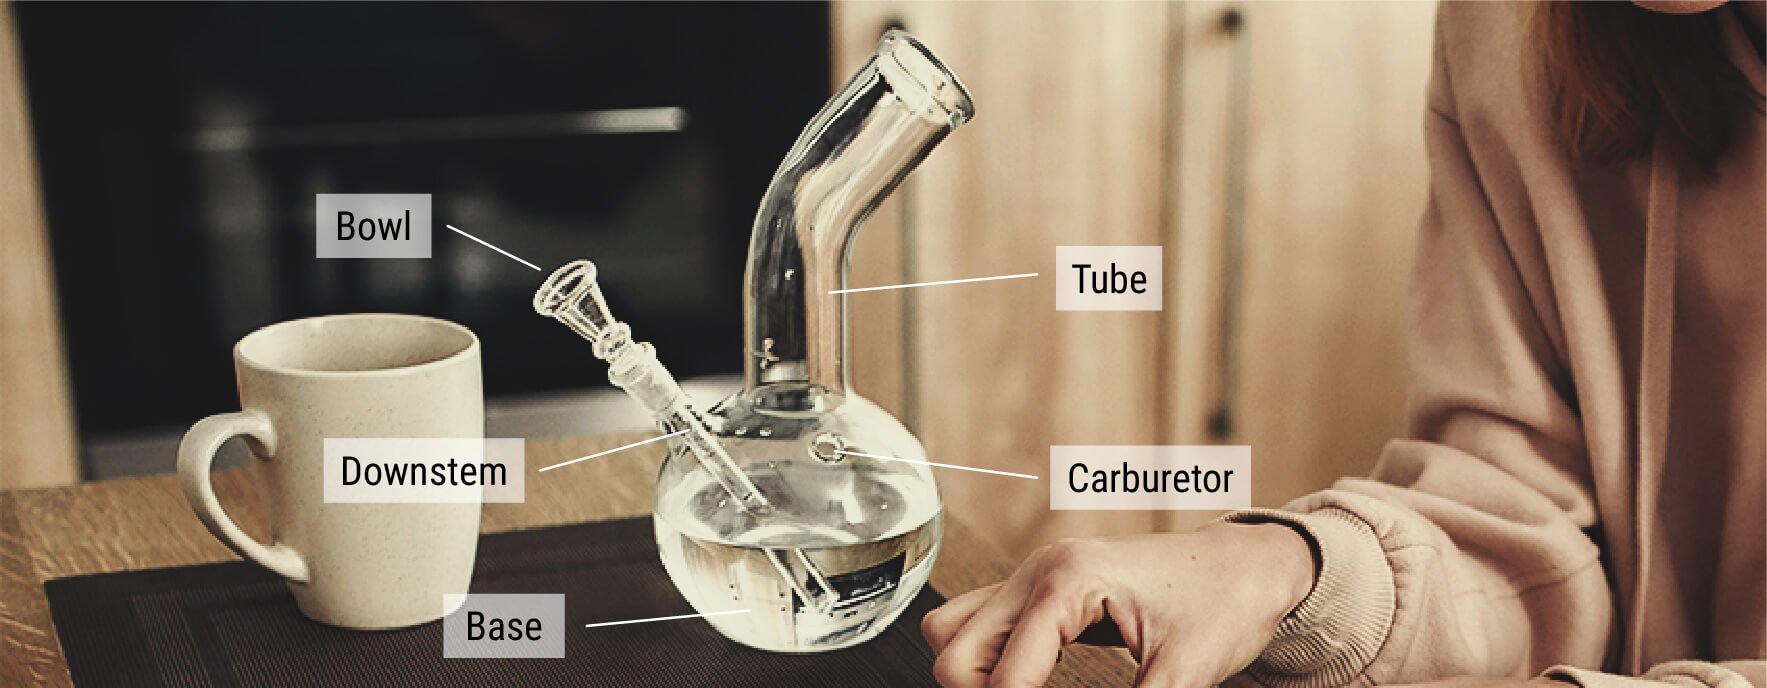 How Does Bong Water Filter Smoke?